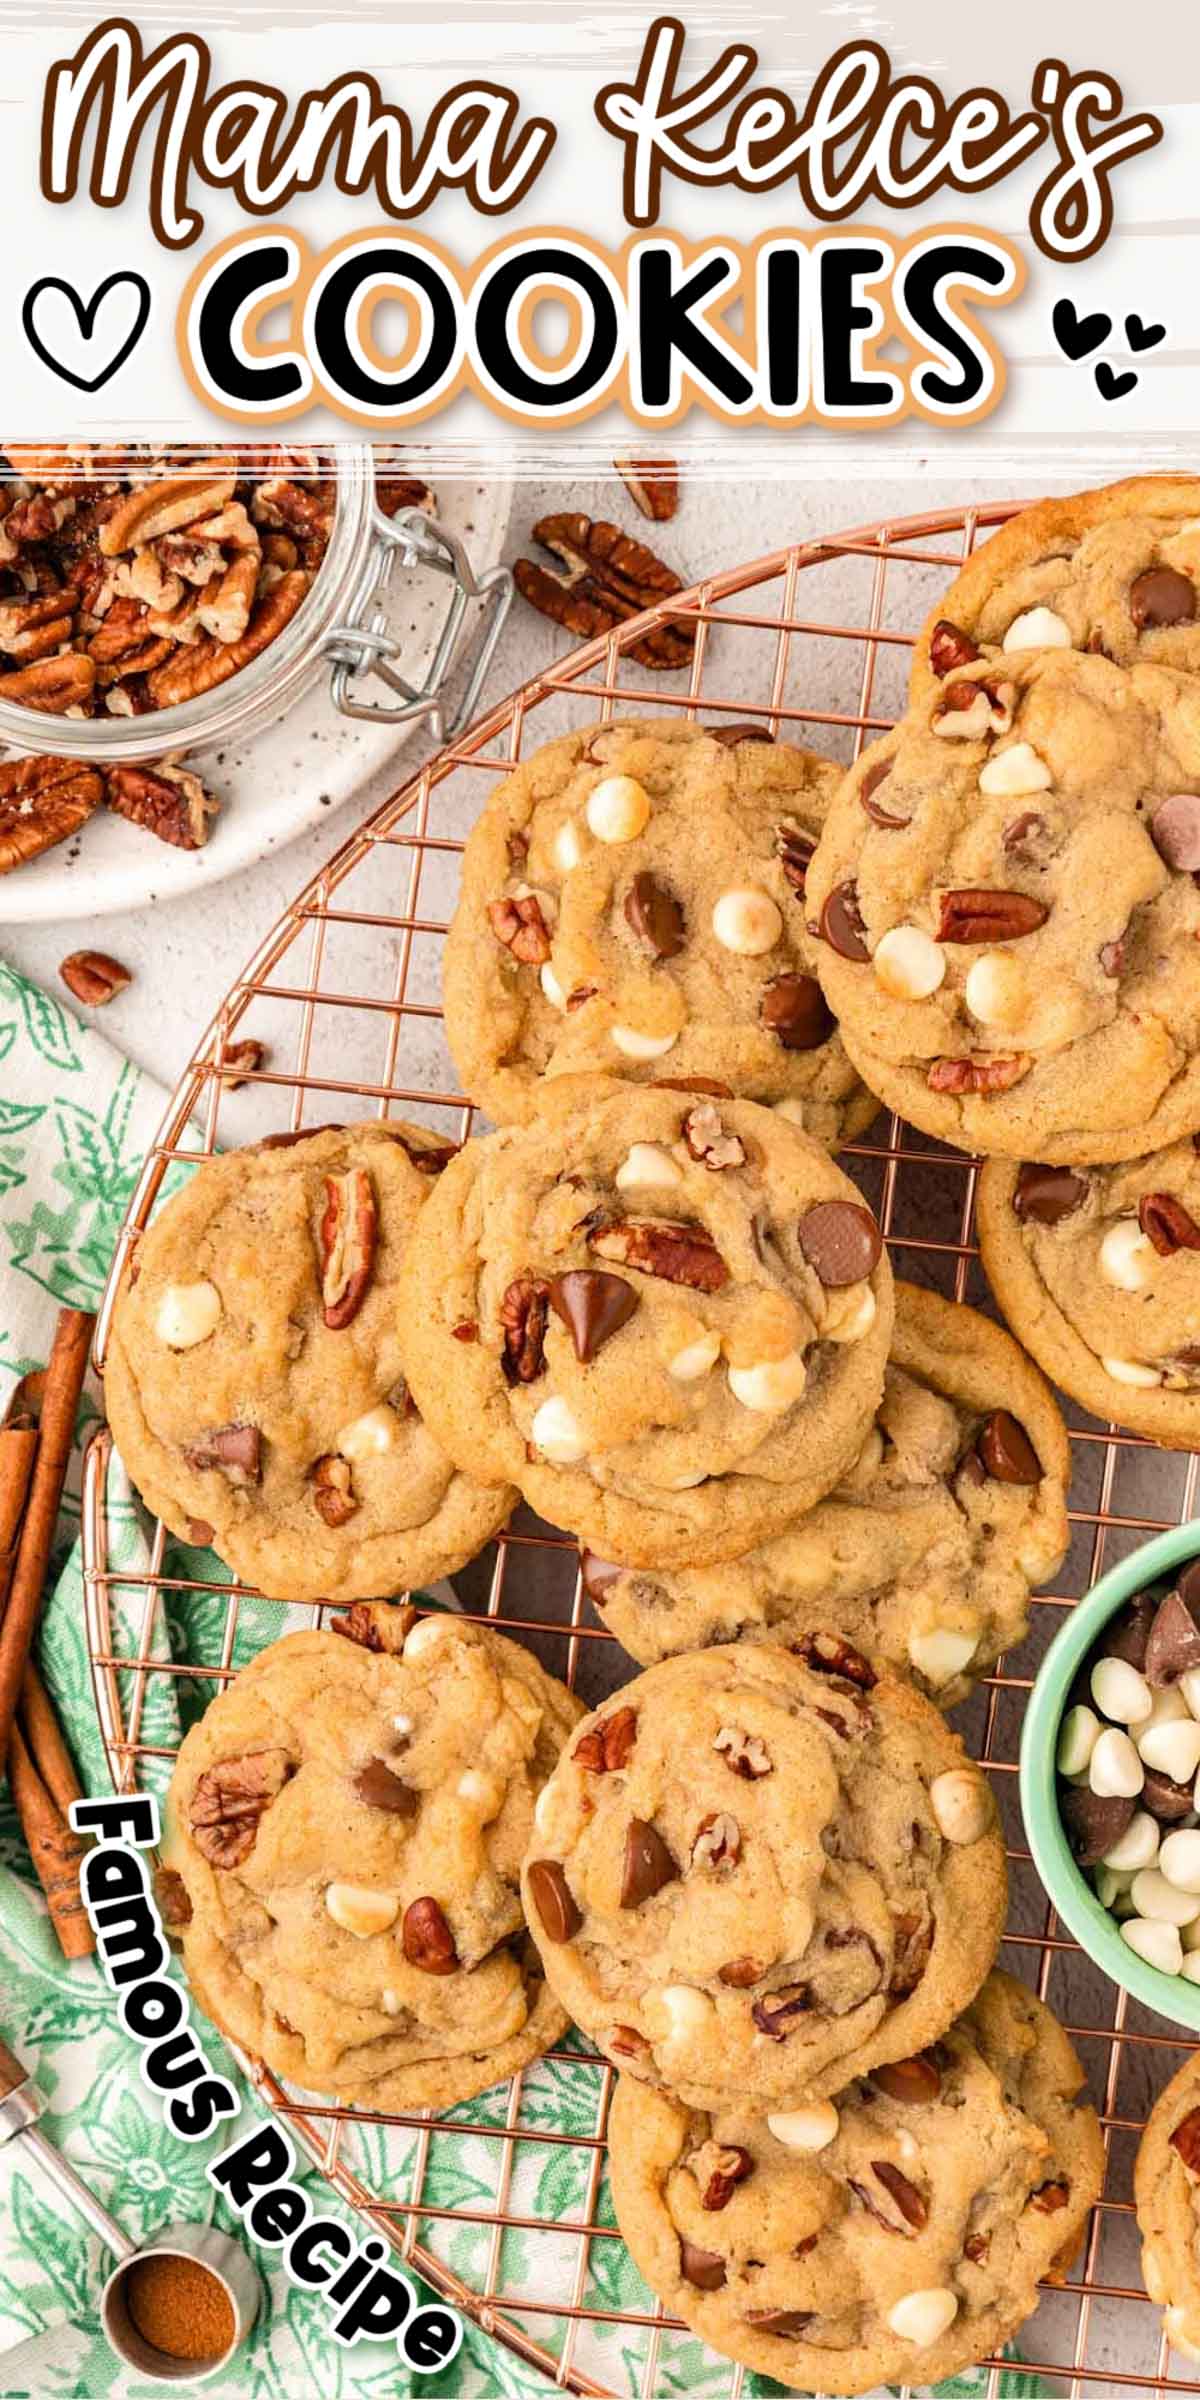 Crunchy chopped pecans, sweet white chocolate, milk chocolate chips, and cozy cinnamon stand out in Mama Kelce's Cookies! 

Mouthwatering sweet, cozy flavor nestled in chewy homemade cookies with crispy edges, a touchdown chocolate chip recipe that has taken over social media, the NFL, and Swifties alike! via @sugarandsoulco